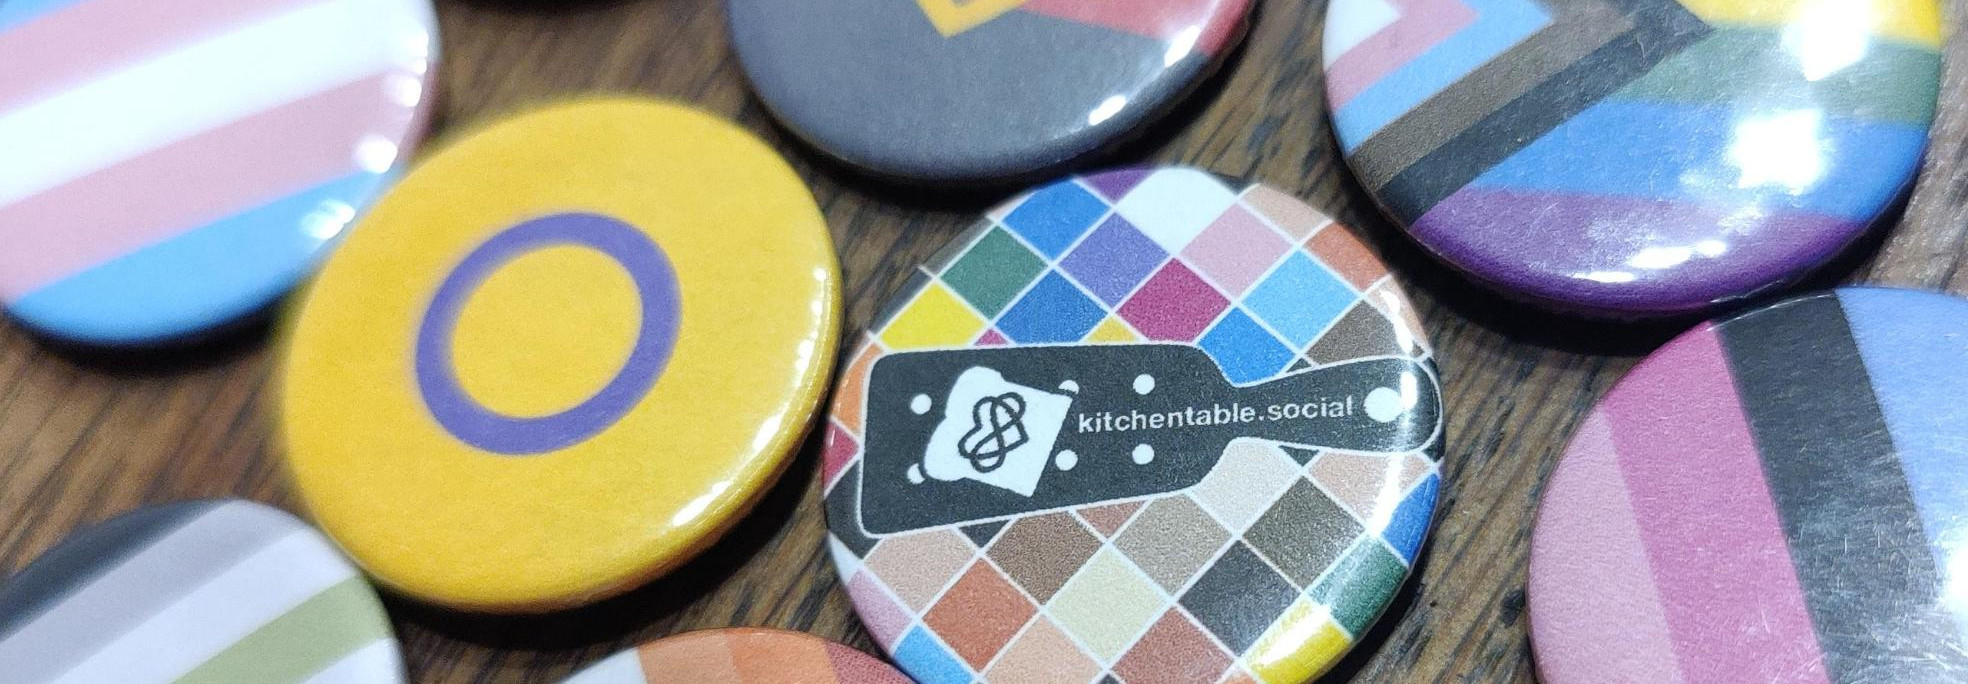 a collection of pride buttons, one of them with the Kitchen Table symbol